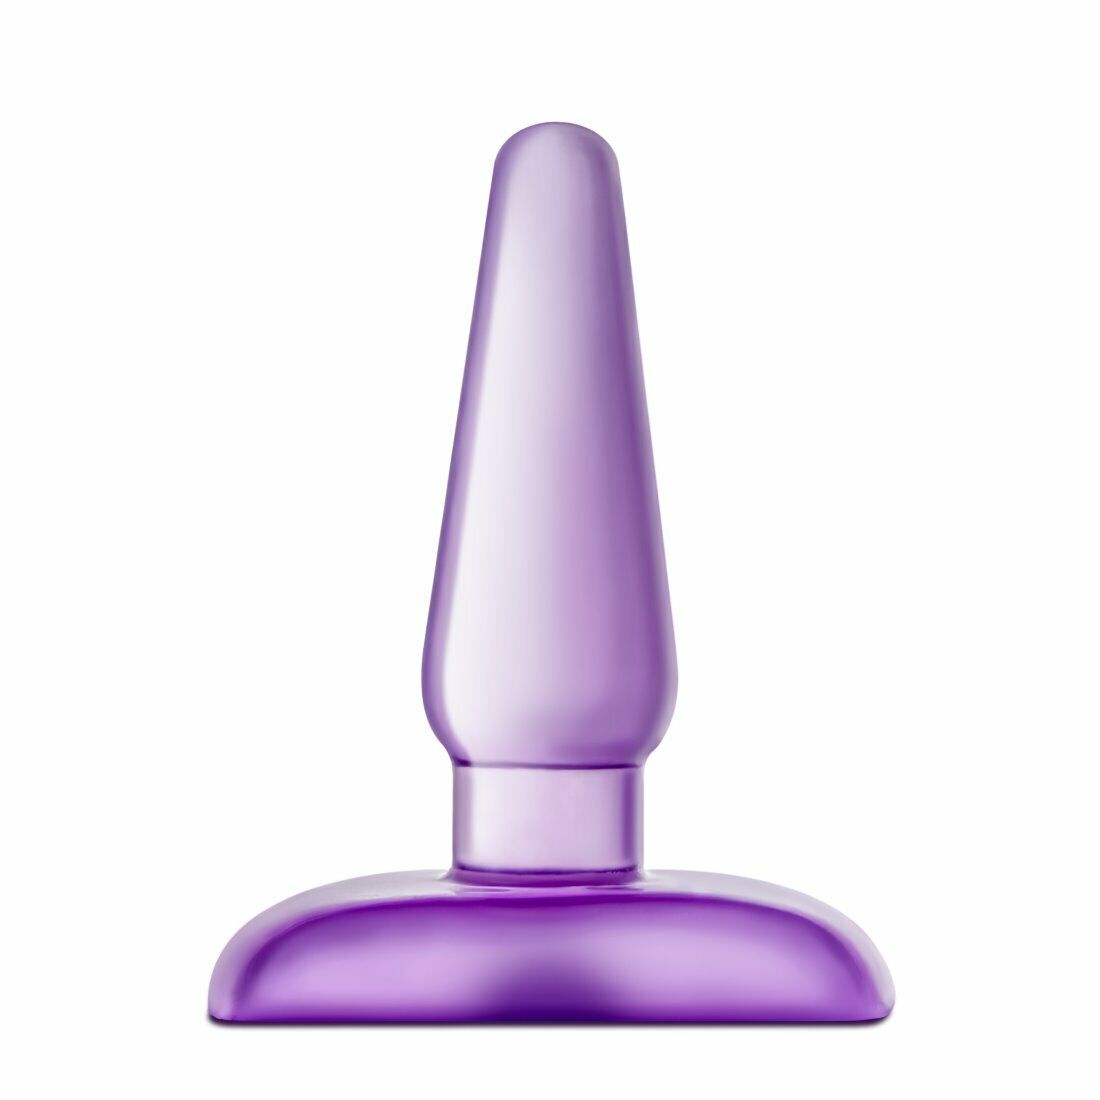 4" Beginner Small Anal Plug Butt Plug Anal Sex Toys for Couples Women Men